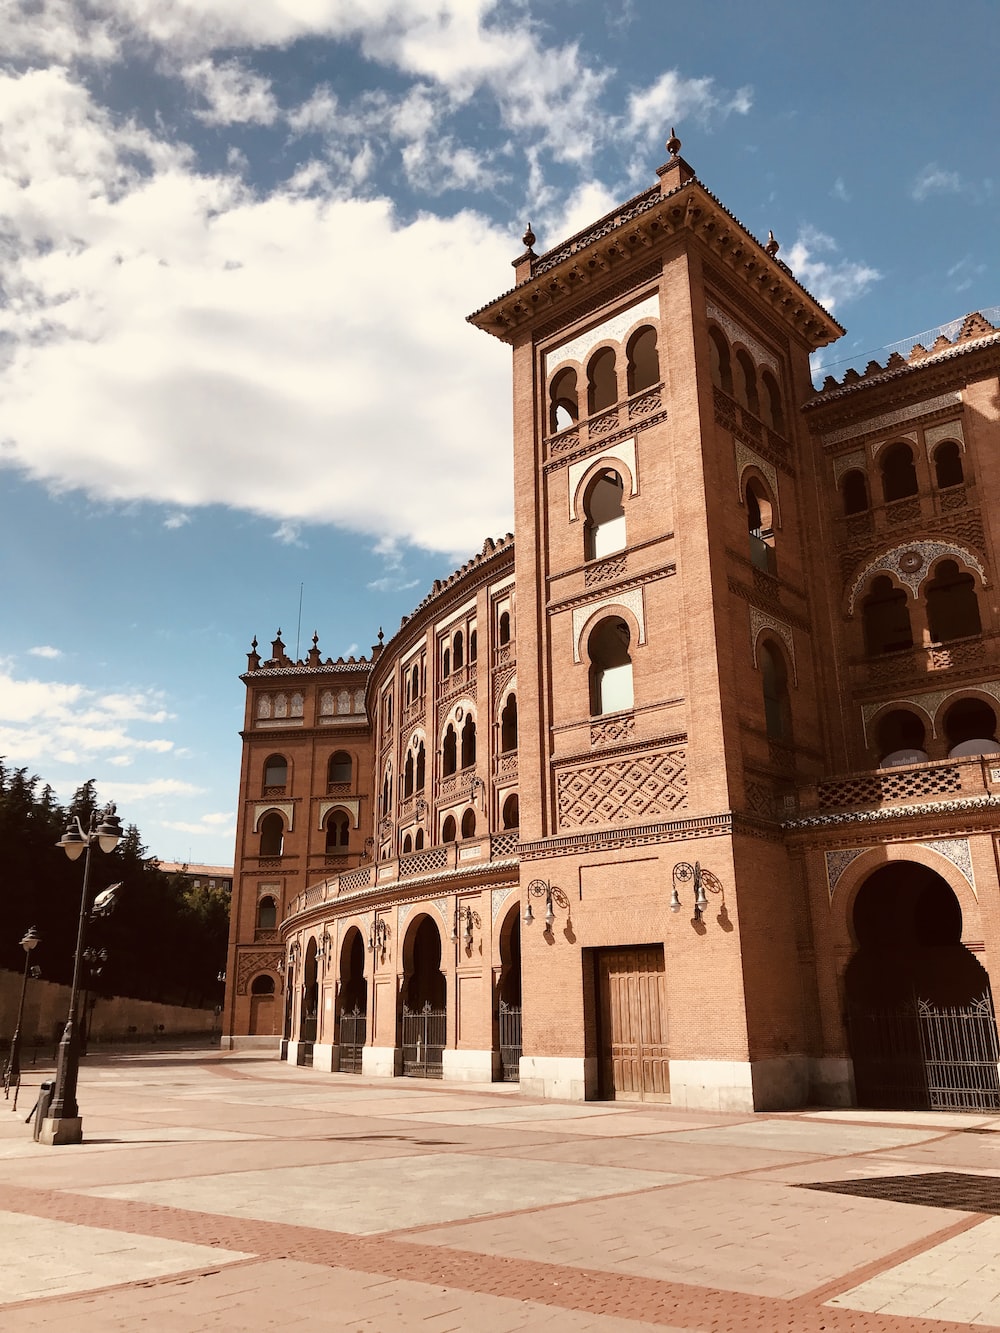 Las Ventas in Madrid under white and blue sky during daytime